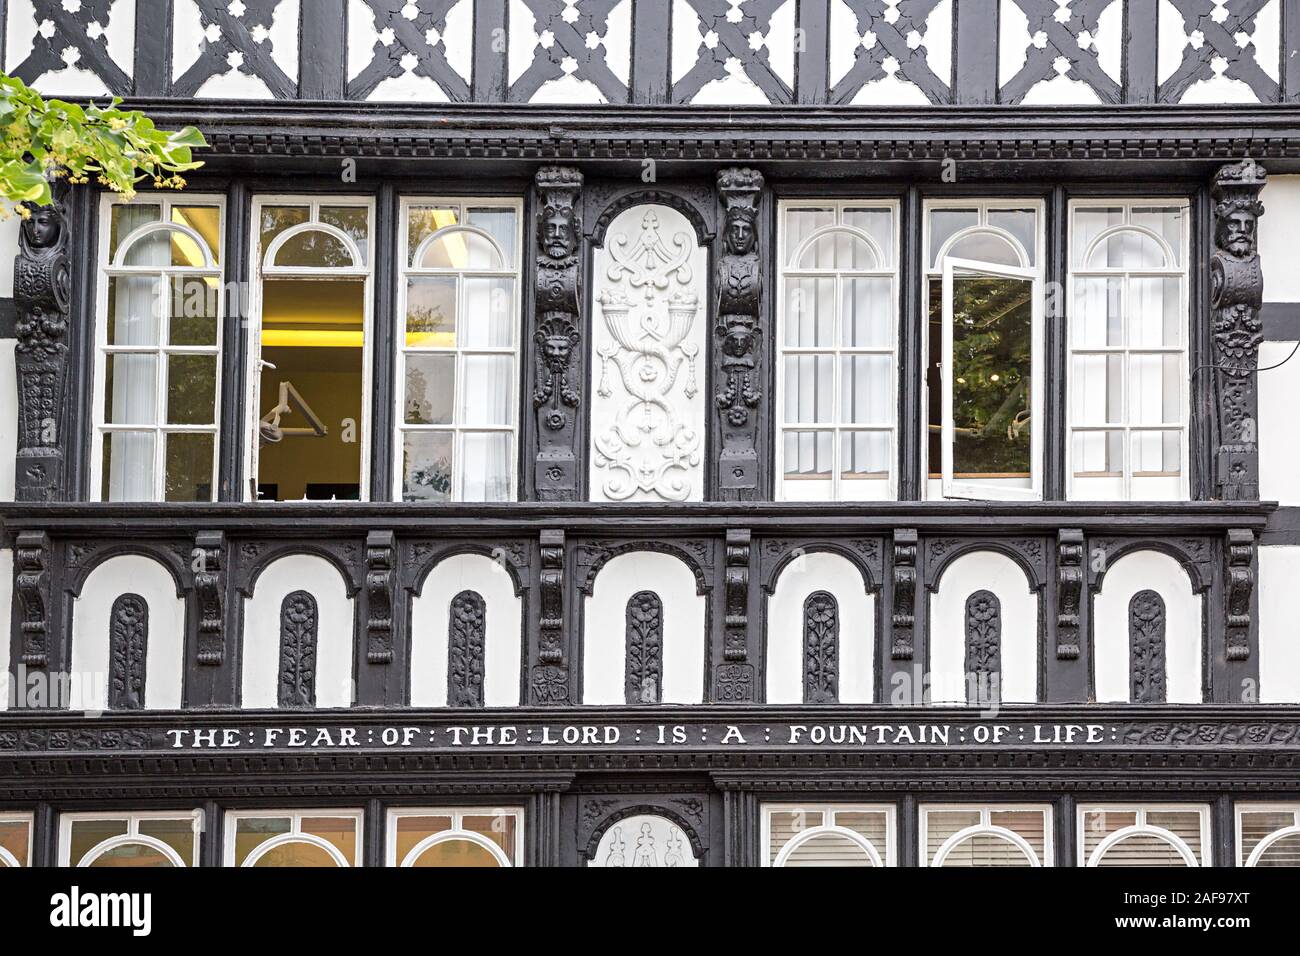 Timbered black and white building with religious inscription, the fear of the lord is a fountain of life, Chester, Cheshire, England, UK Stock Photo